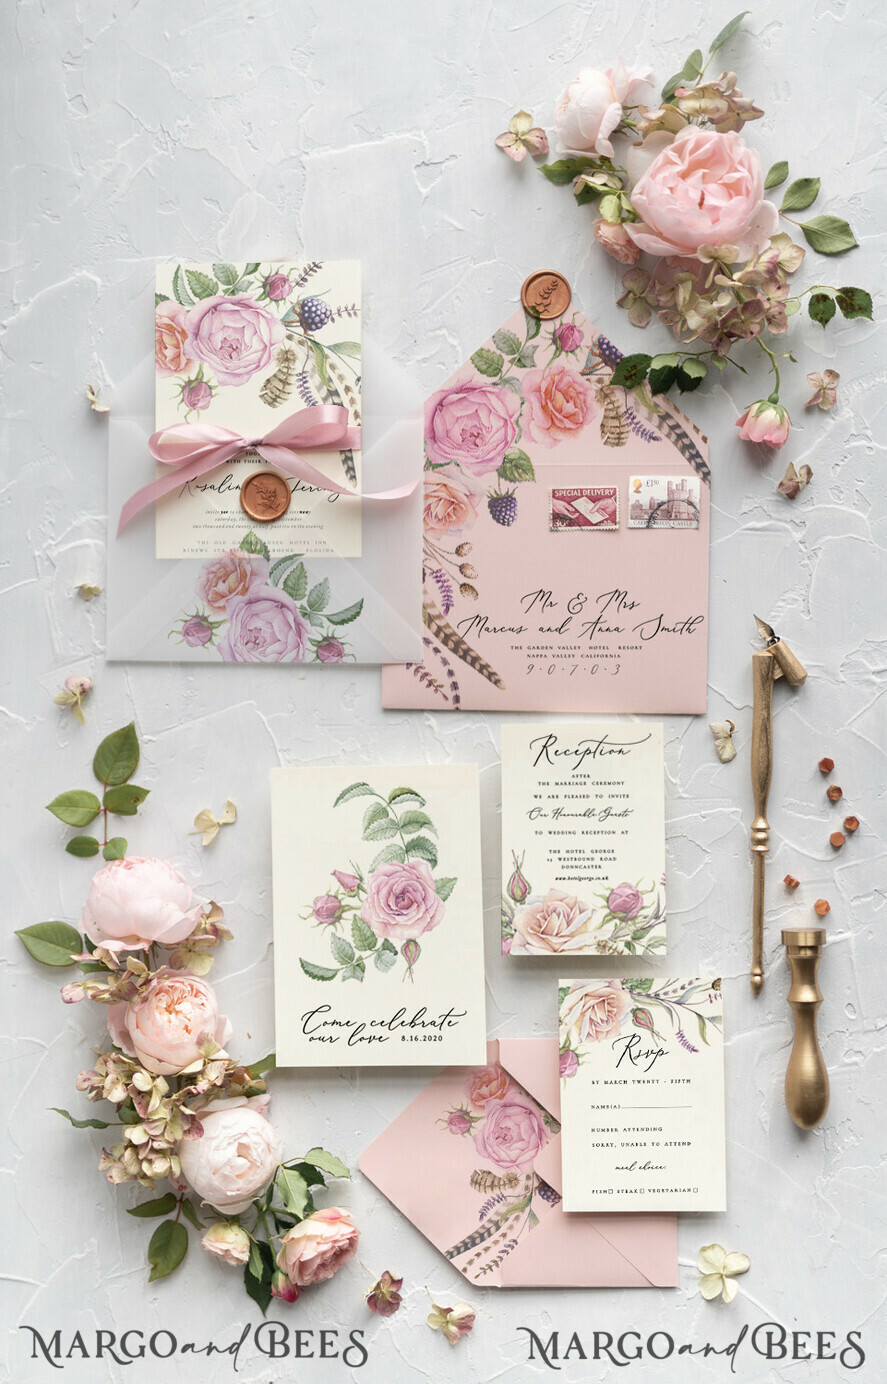 Essential Elements for a Pink and Green Garden Wedding Amidst Roses in an Enchanting Palace